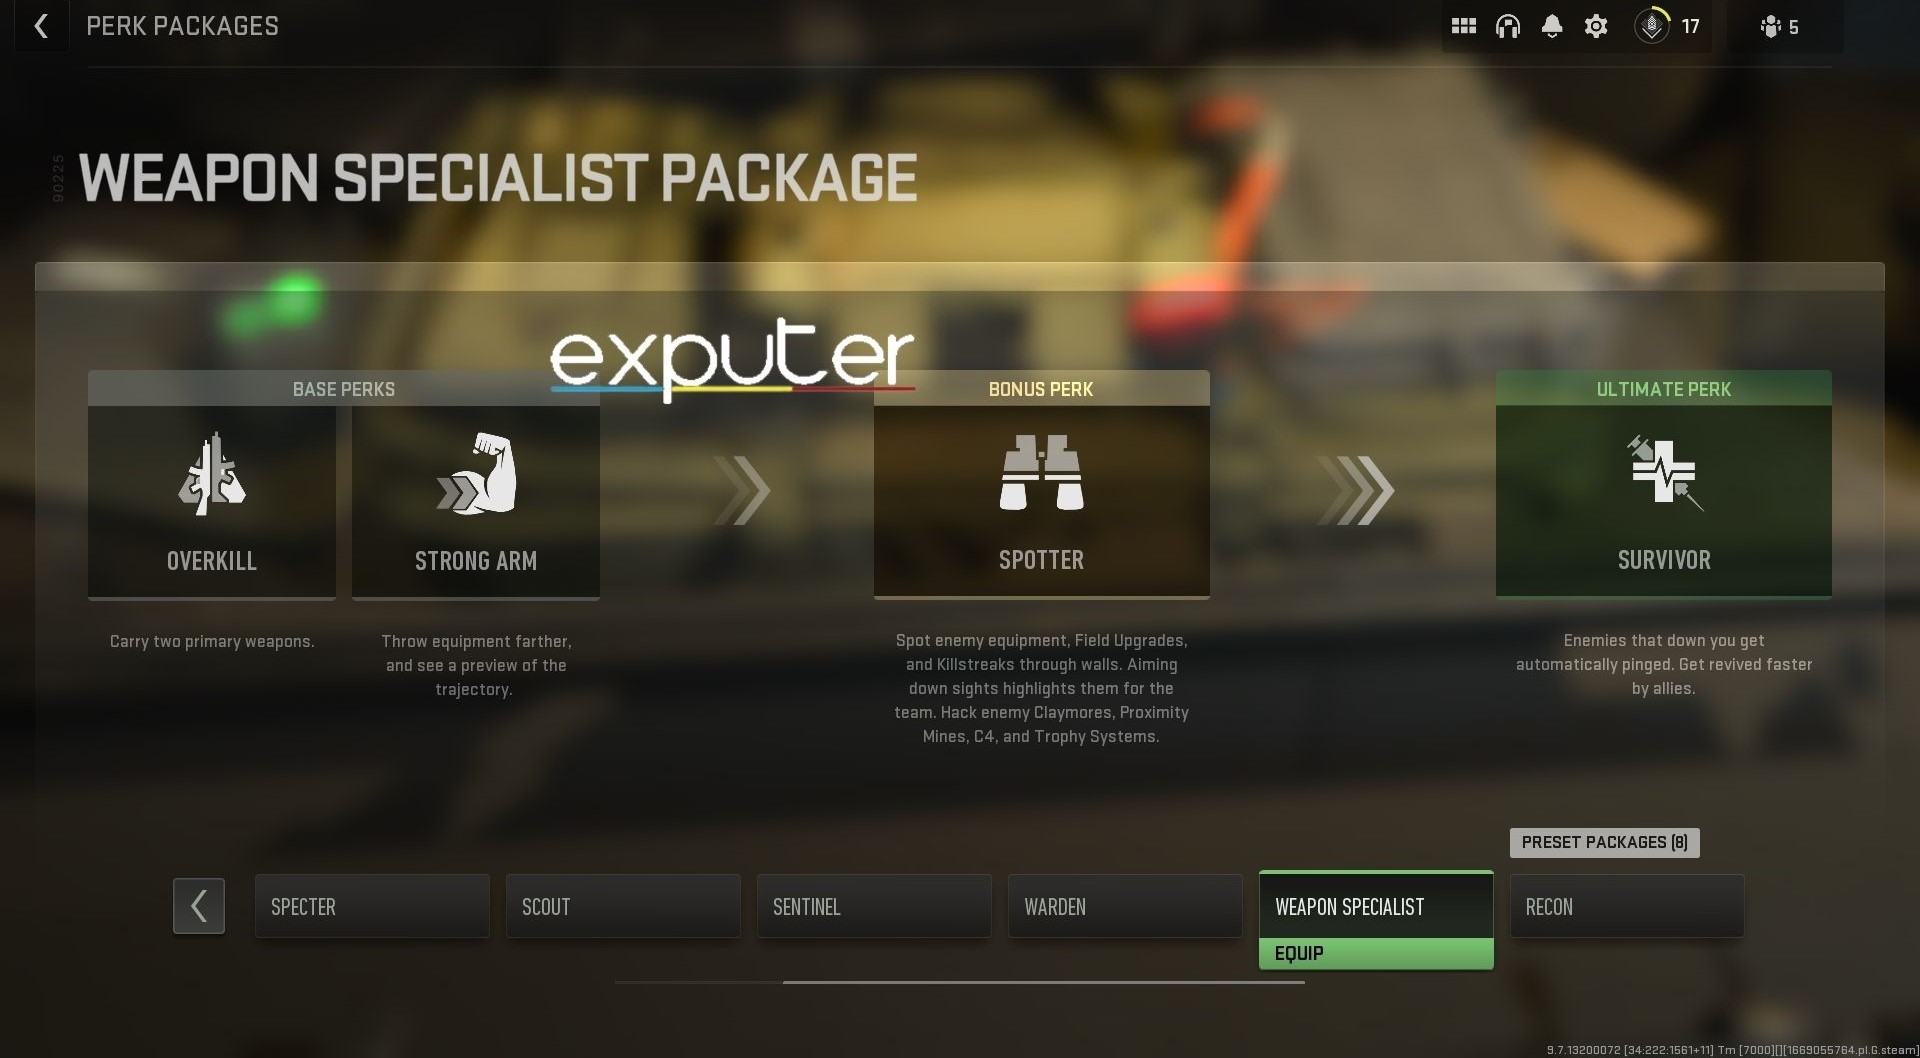 Weapon Specialist Package